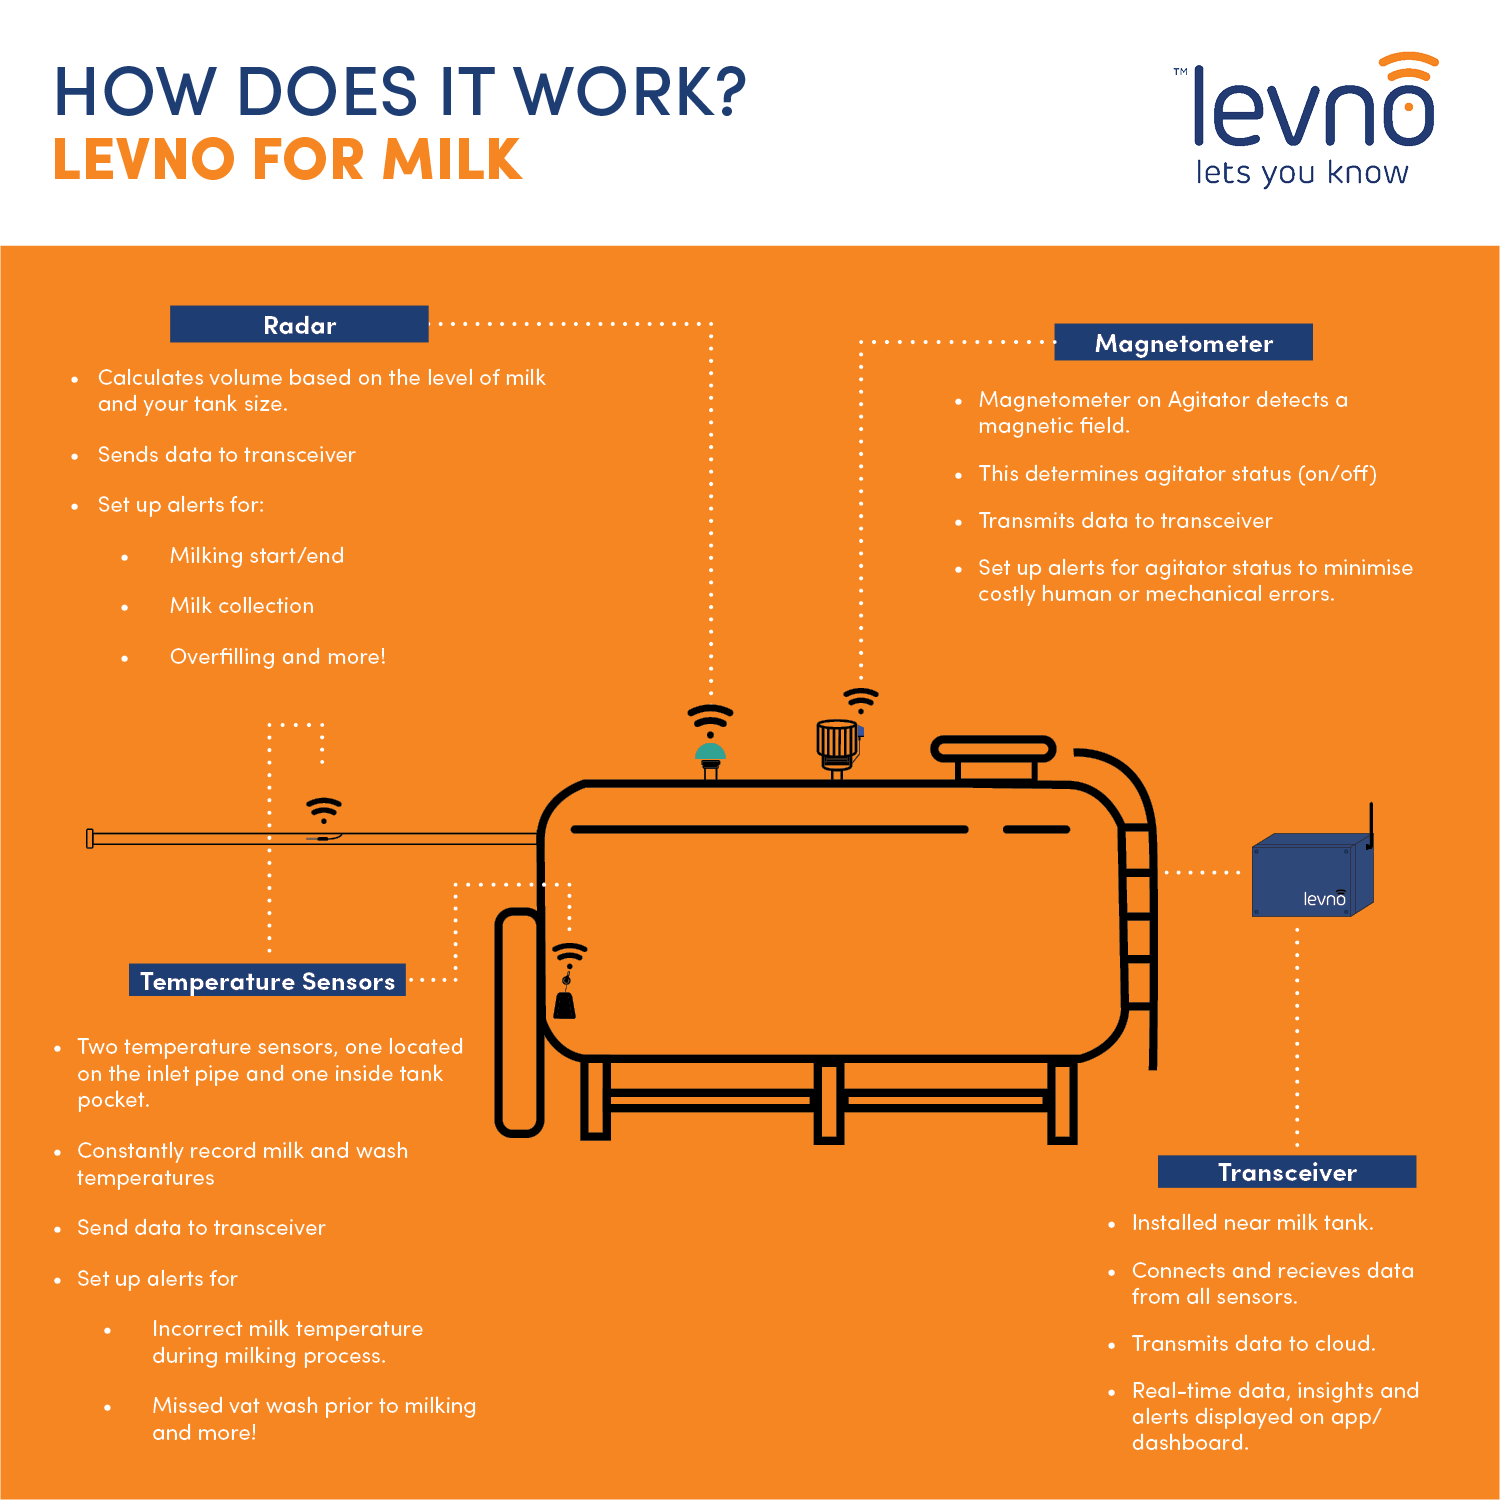 Levno for Milk - How it works (UK 2023)